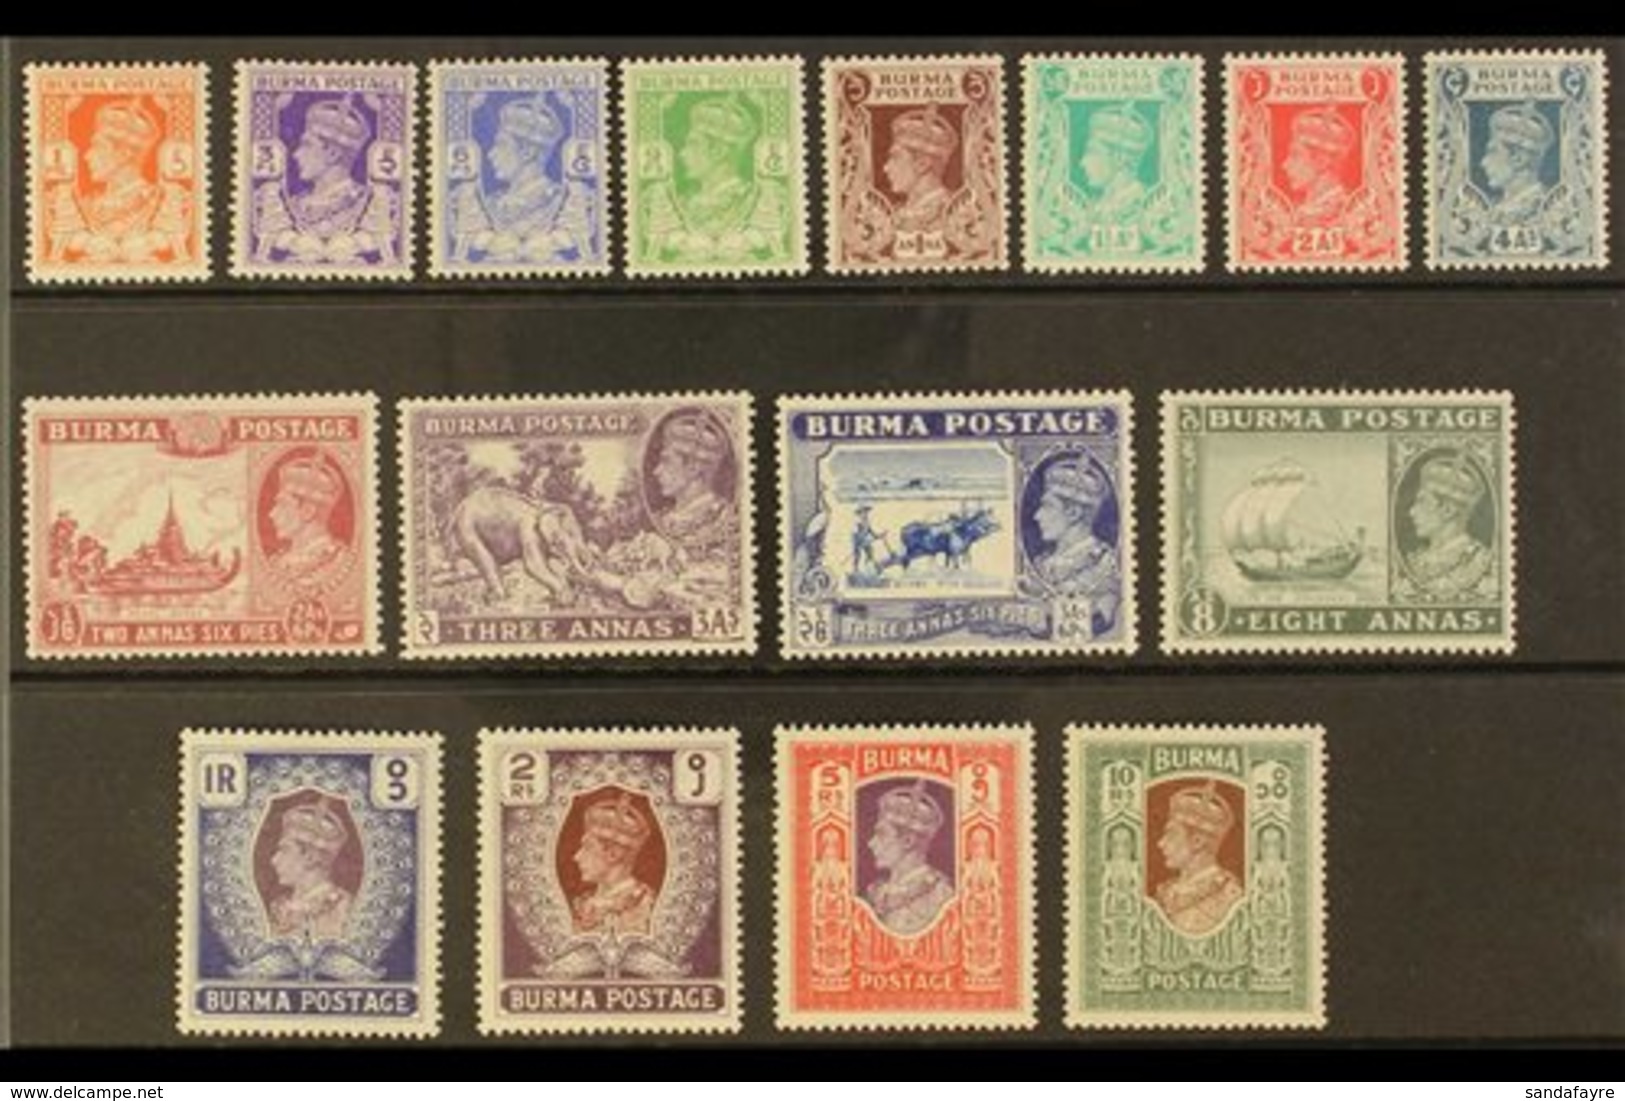 1938-40 Pictorials Complete Set, SG 18b/33, Never Hinged Mint, Fresh. (16 Stamps) For More Images, Please Visit Http://w - Birmania (...-1947)